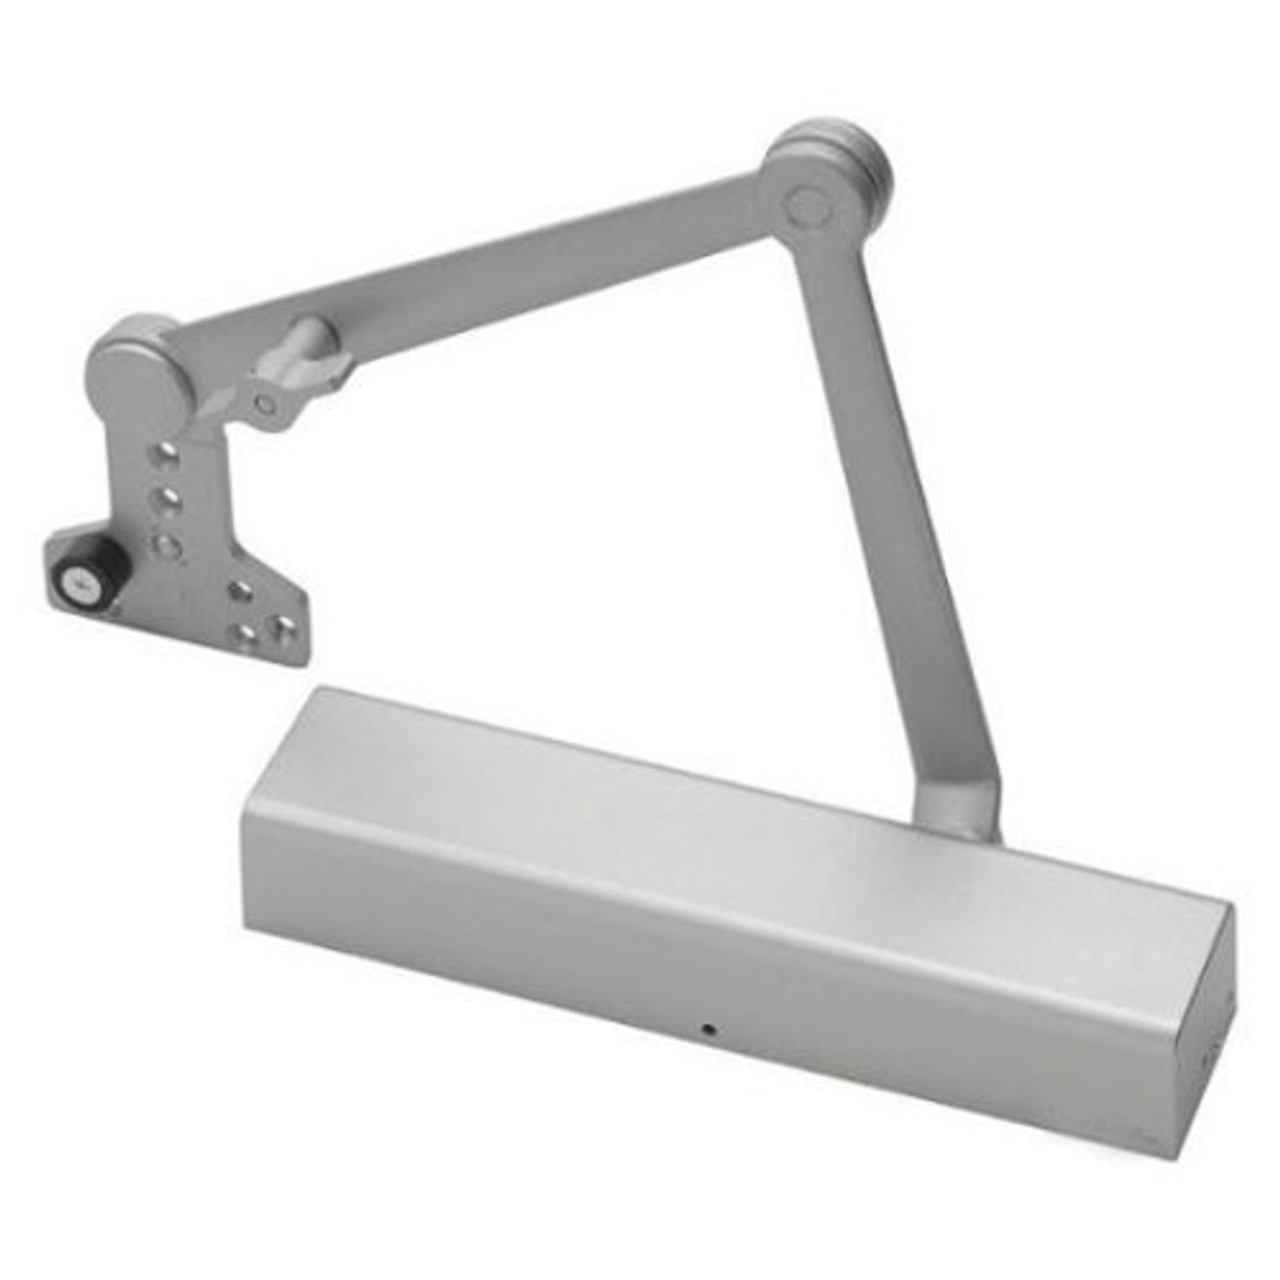 210-HDH-689 Norton 210 Series Door Closer Heavy-Duty Hold Open Thumbturn Arm with Removable Stop in Aluminum Finish